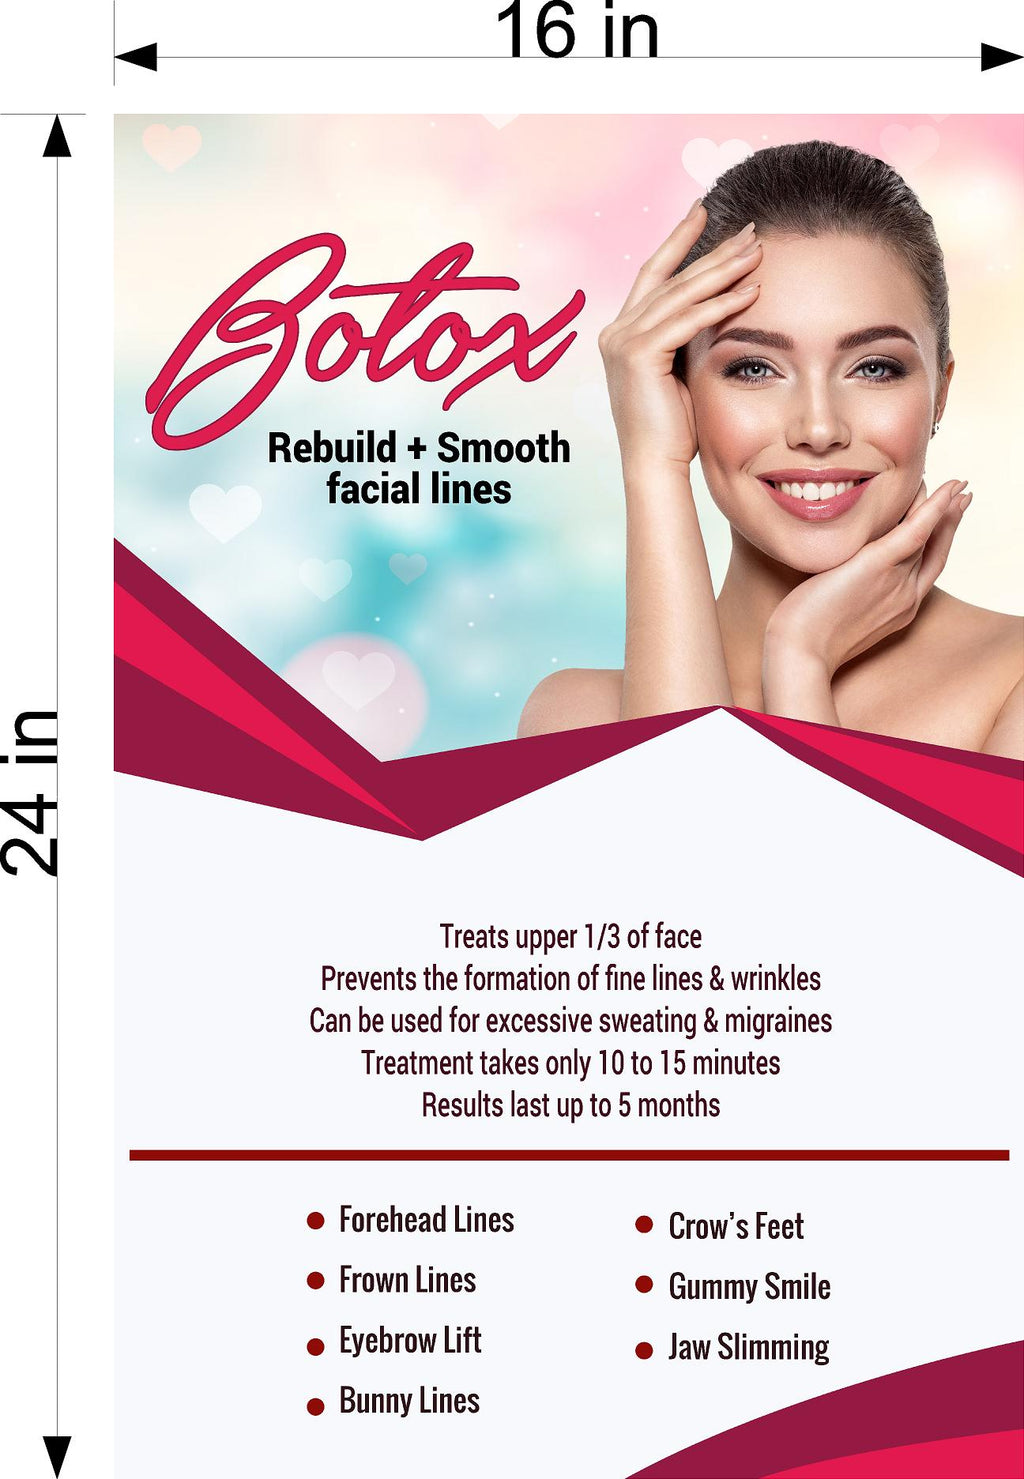 Botox 07 Photo-Realistic Paper Poster Premium Interior Inside Sign Advertising Marketing Wall Window Non-Laminated Vertical